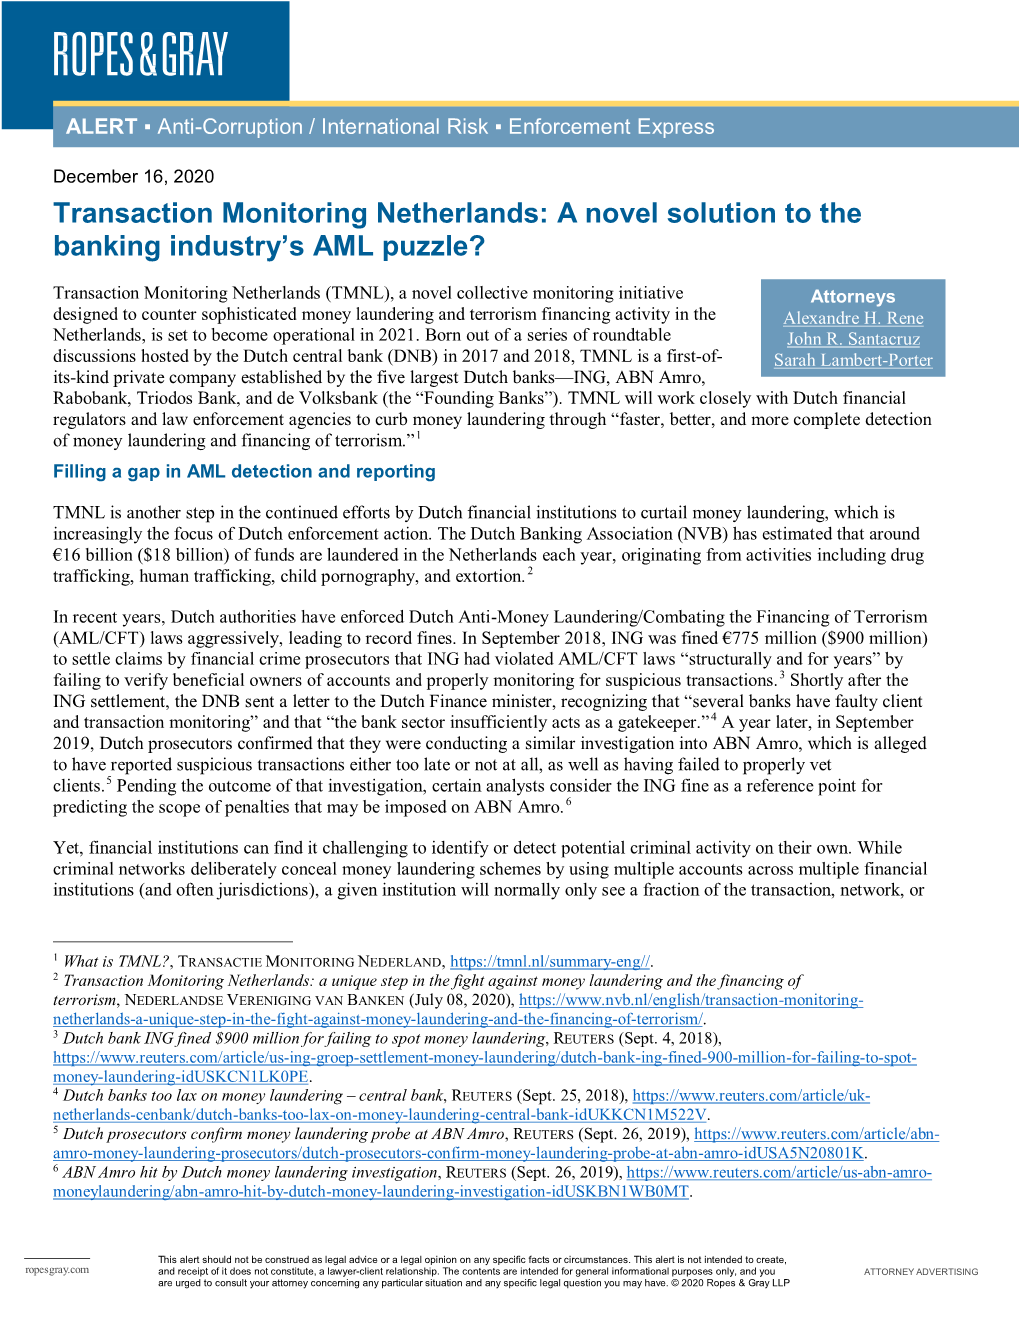 Transaction Monitoring Netherlands: a Novel Solution to the Banking Industry’S AML Puzzle?